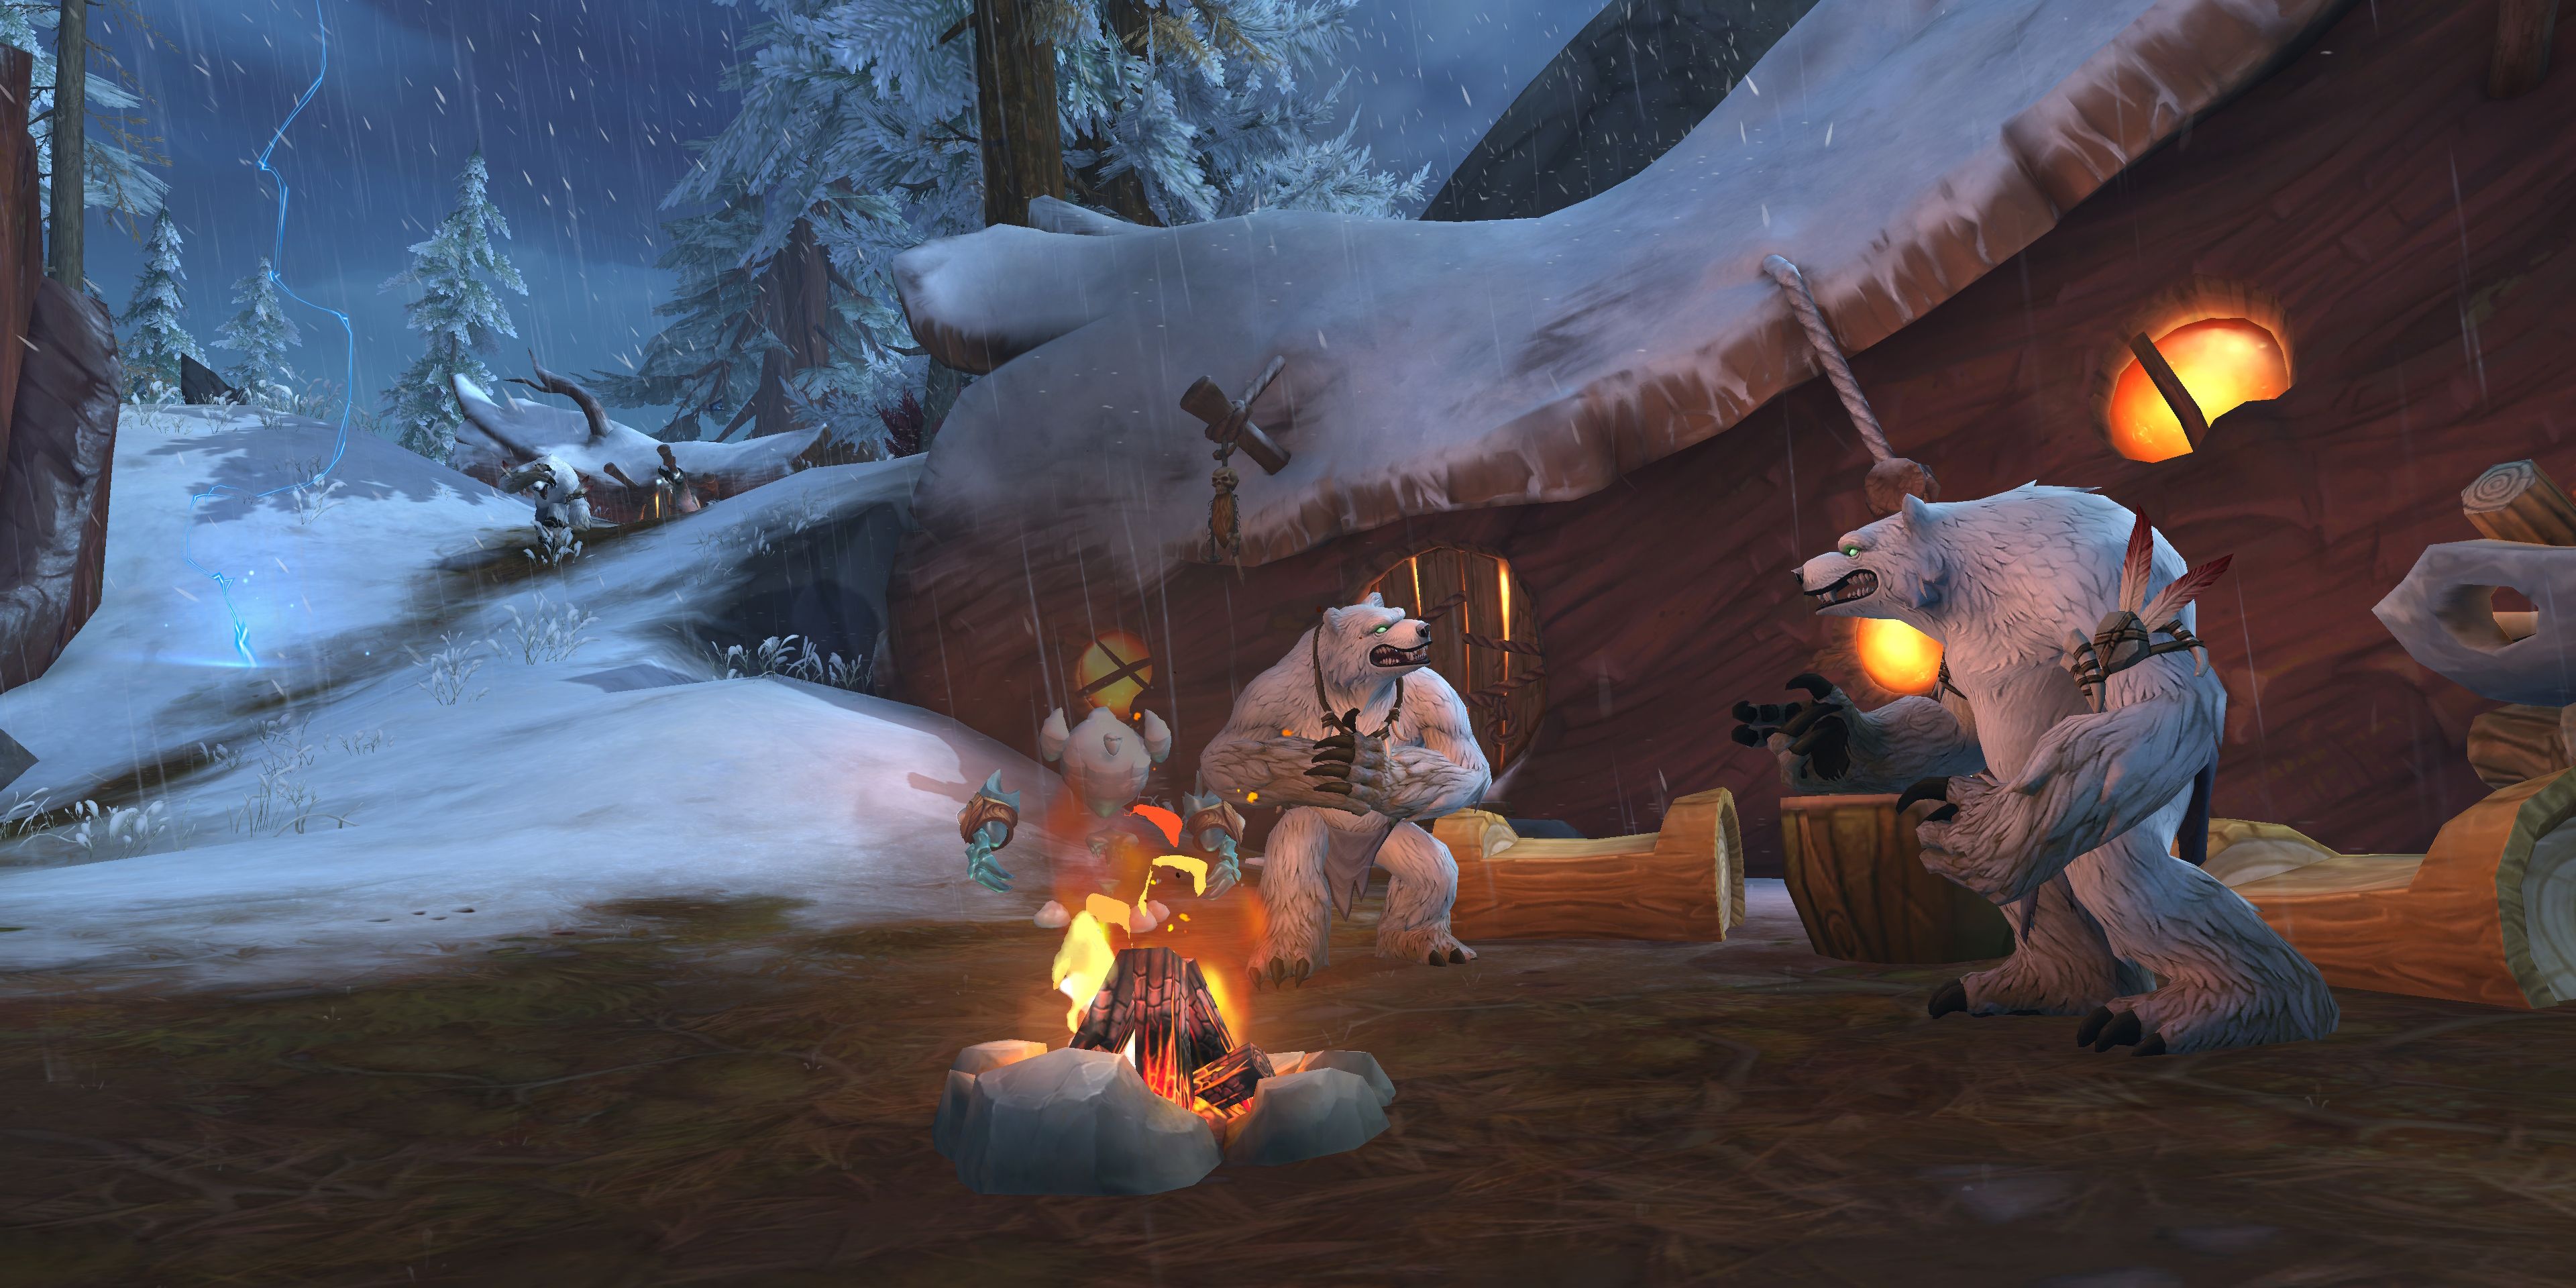 Two Winterpelt Furbolg's are gathered around a campfire in front of a building, one is sitting and one is standing. They appear to be having a conversation